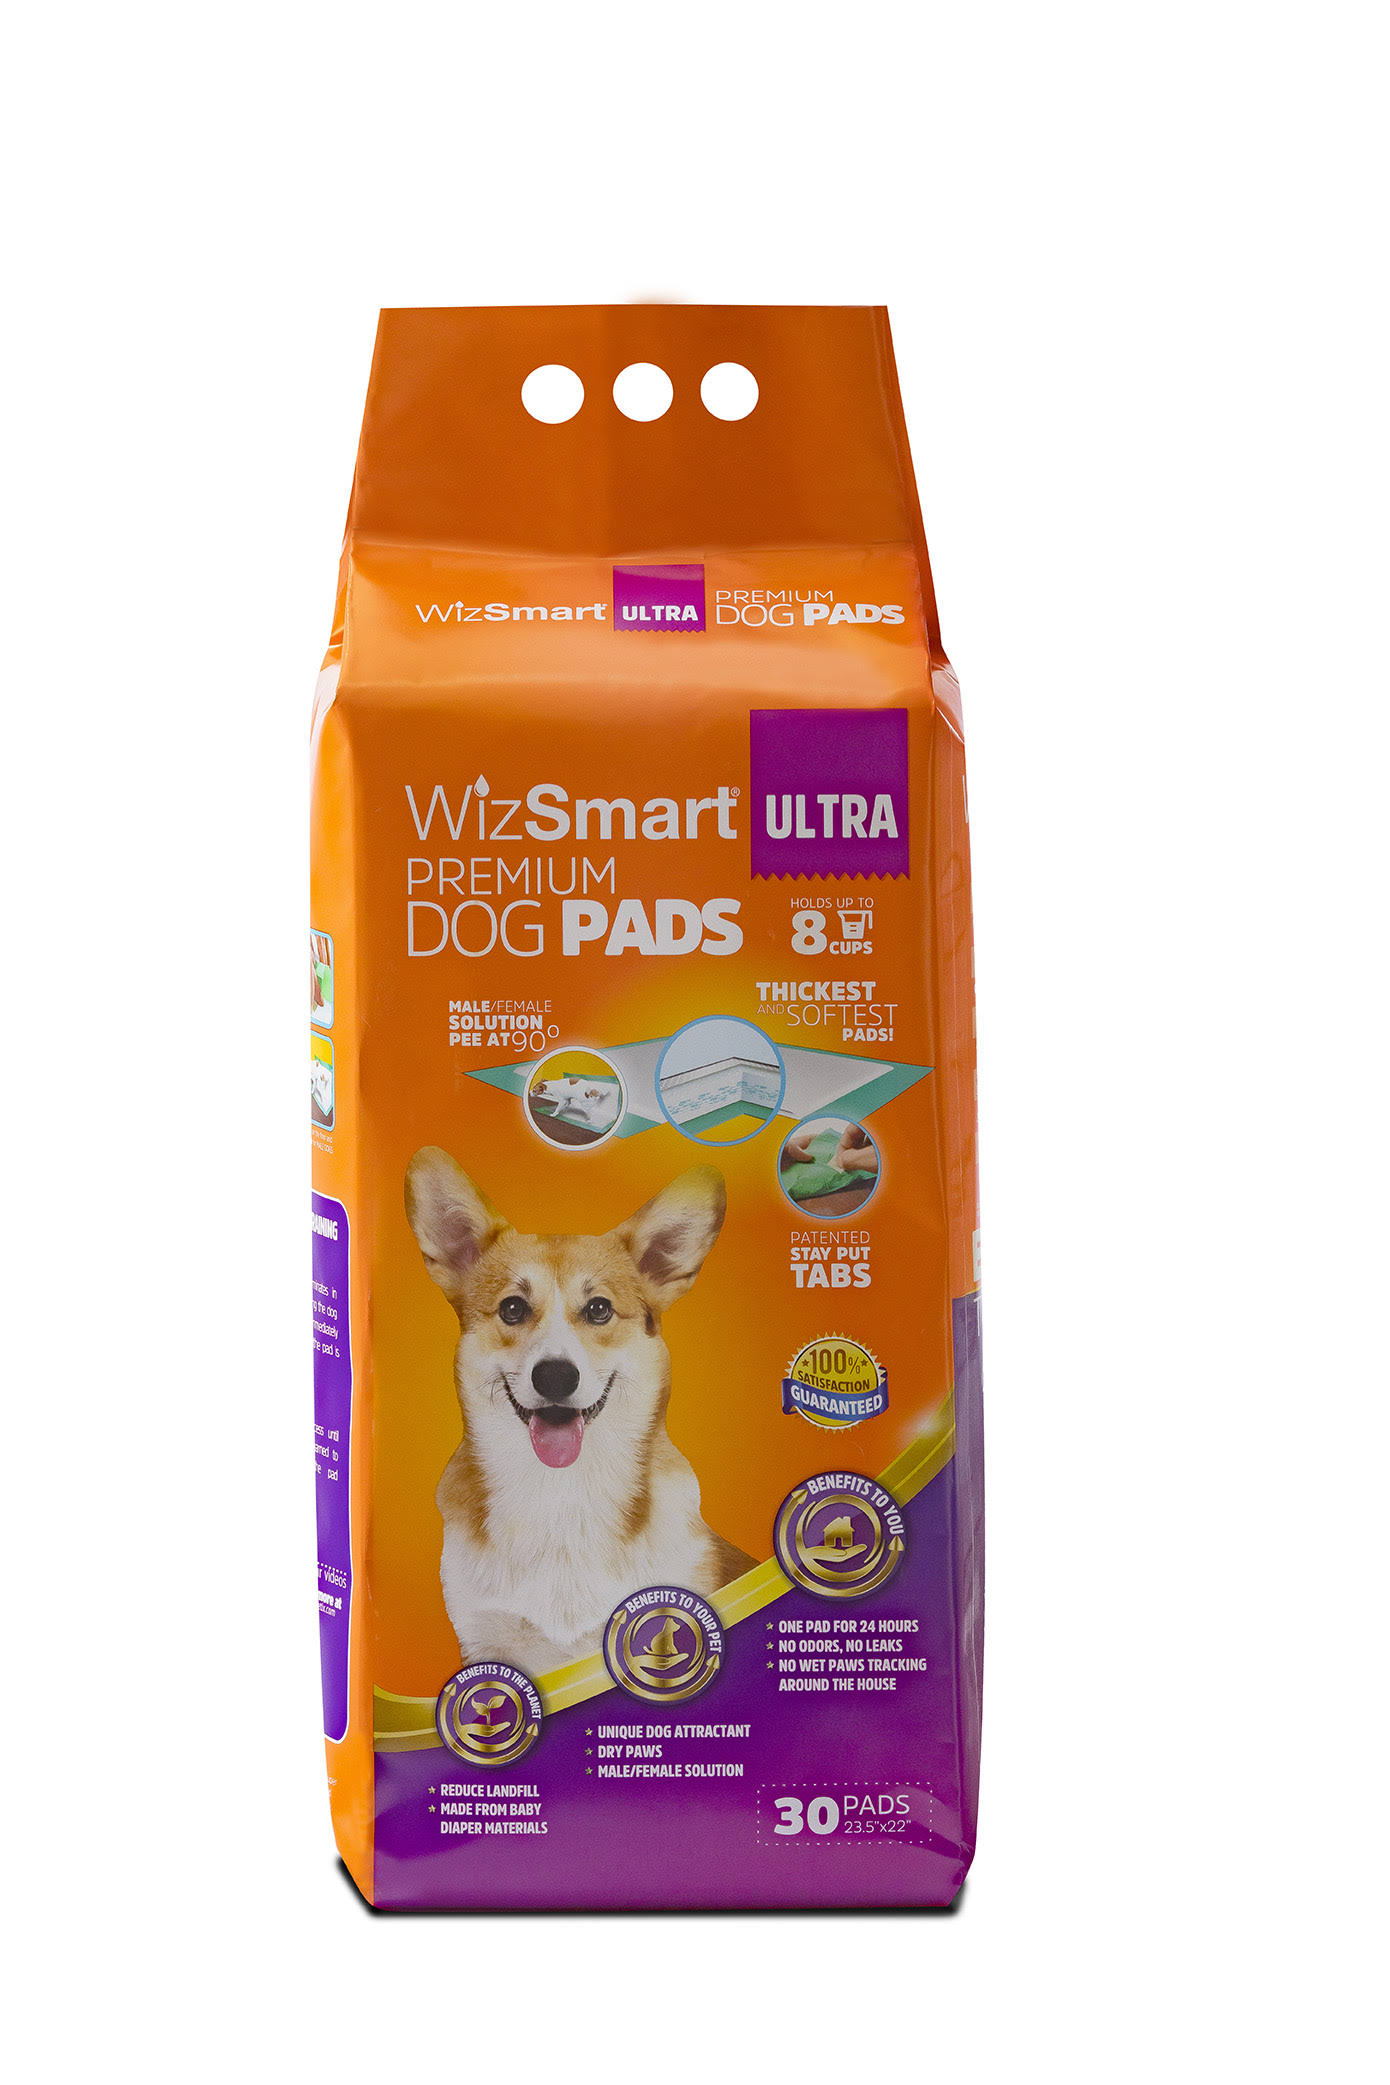 WizSmart All Day Dry Premium Dog and Puppy Training Pads, Made with Recycled Unused Baby Diapers and Eco Friendly Materials